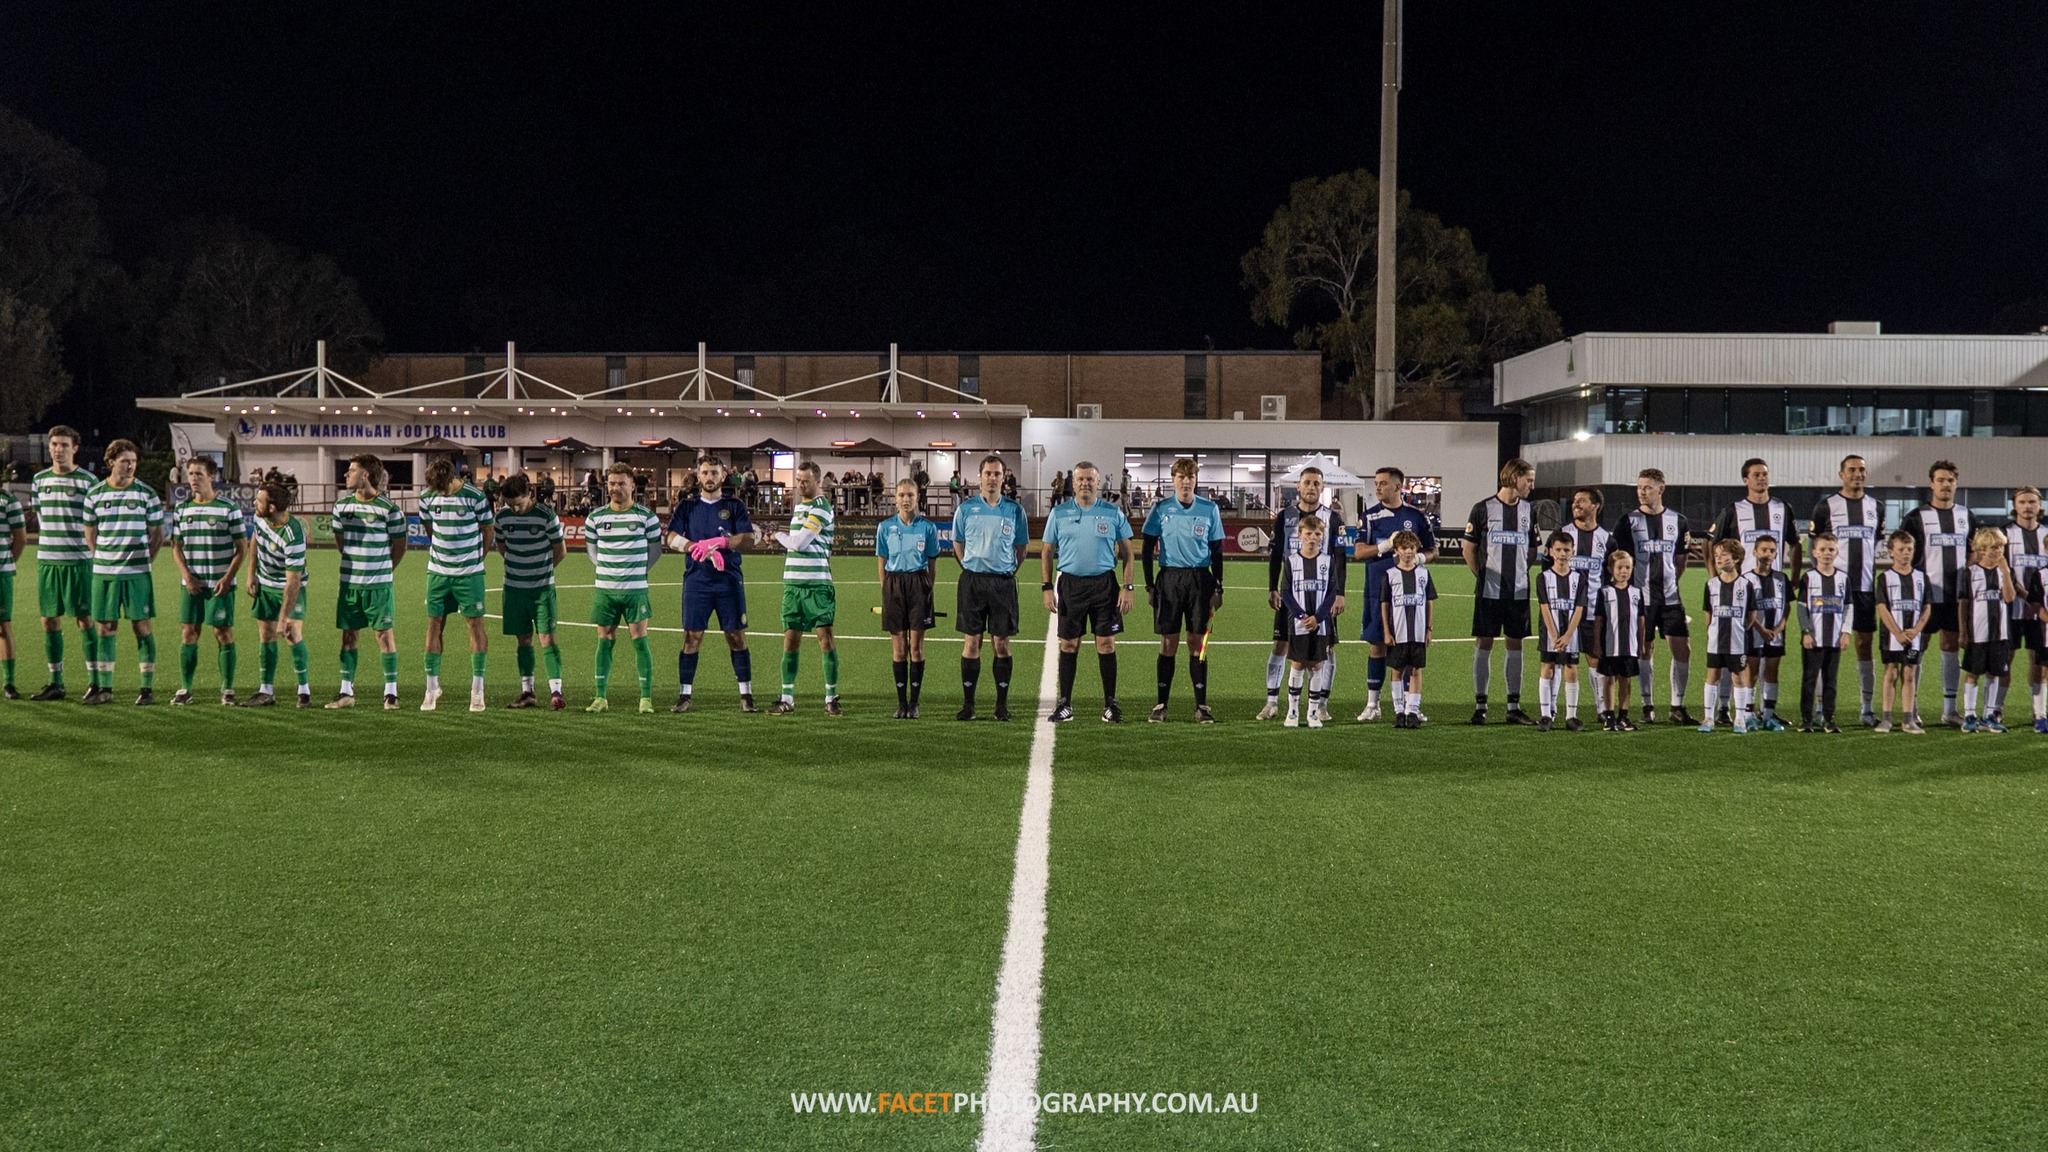 Men's Premier League Round 12: A pre-game shot from the 2023 MWFA Men's Challenge Cup Final between Pittwater RSL and Narrabeen. Photo credit: Jeremy Denham